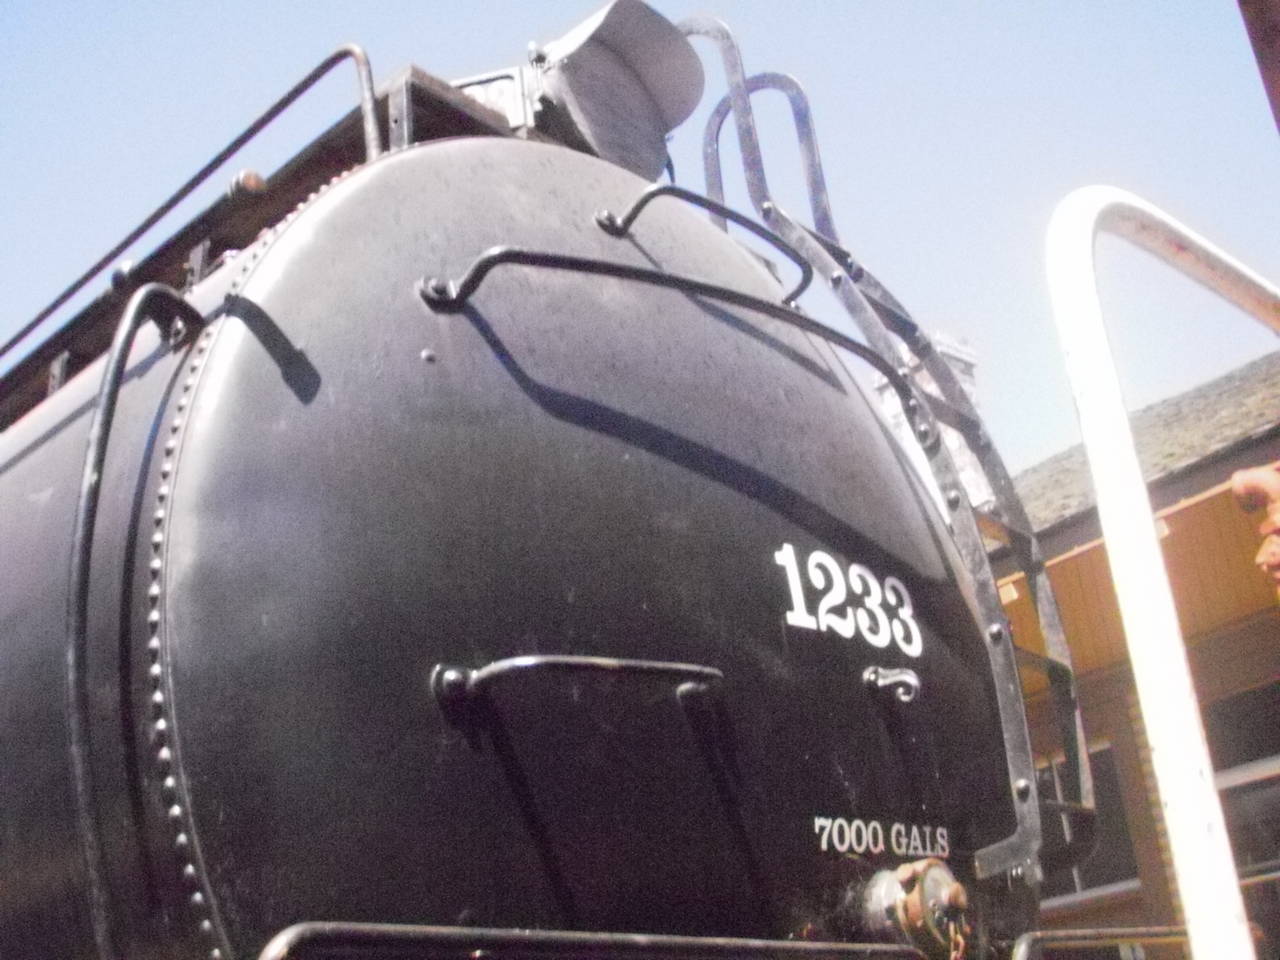 Southern Pacific 1233's tender